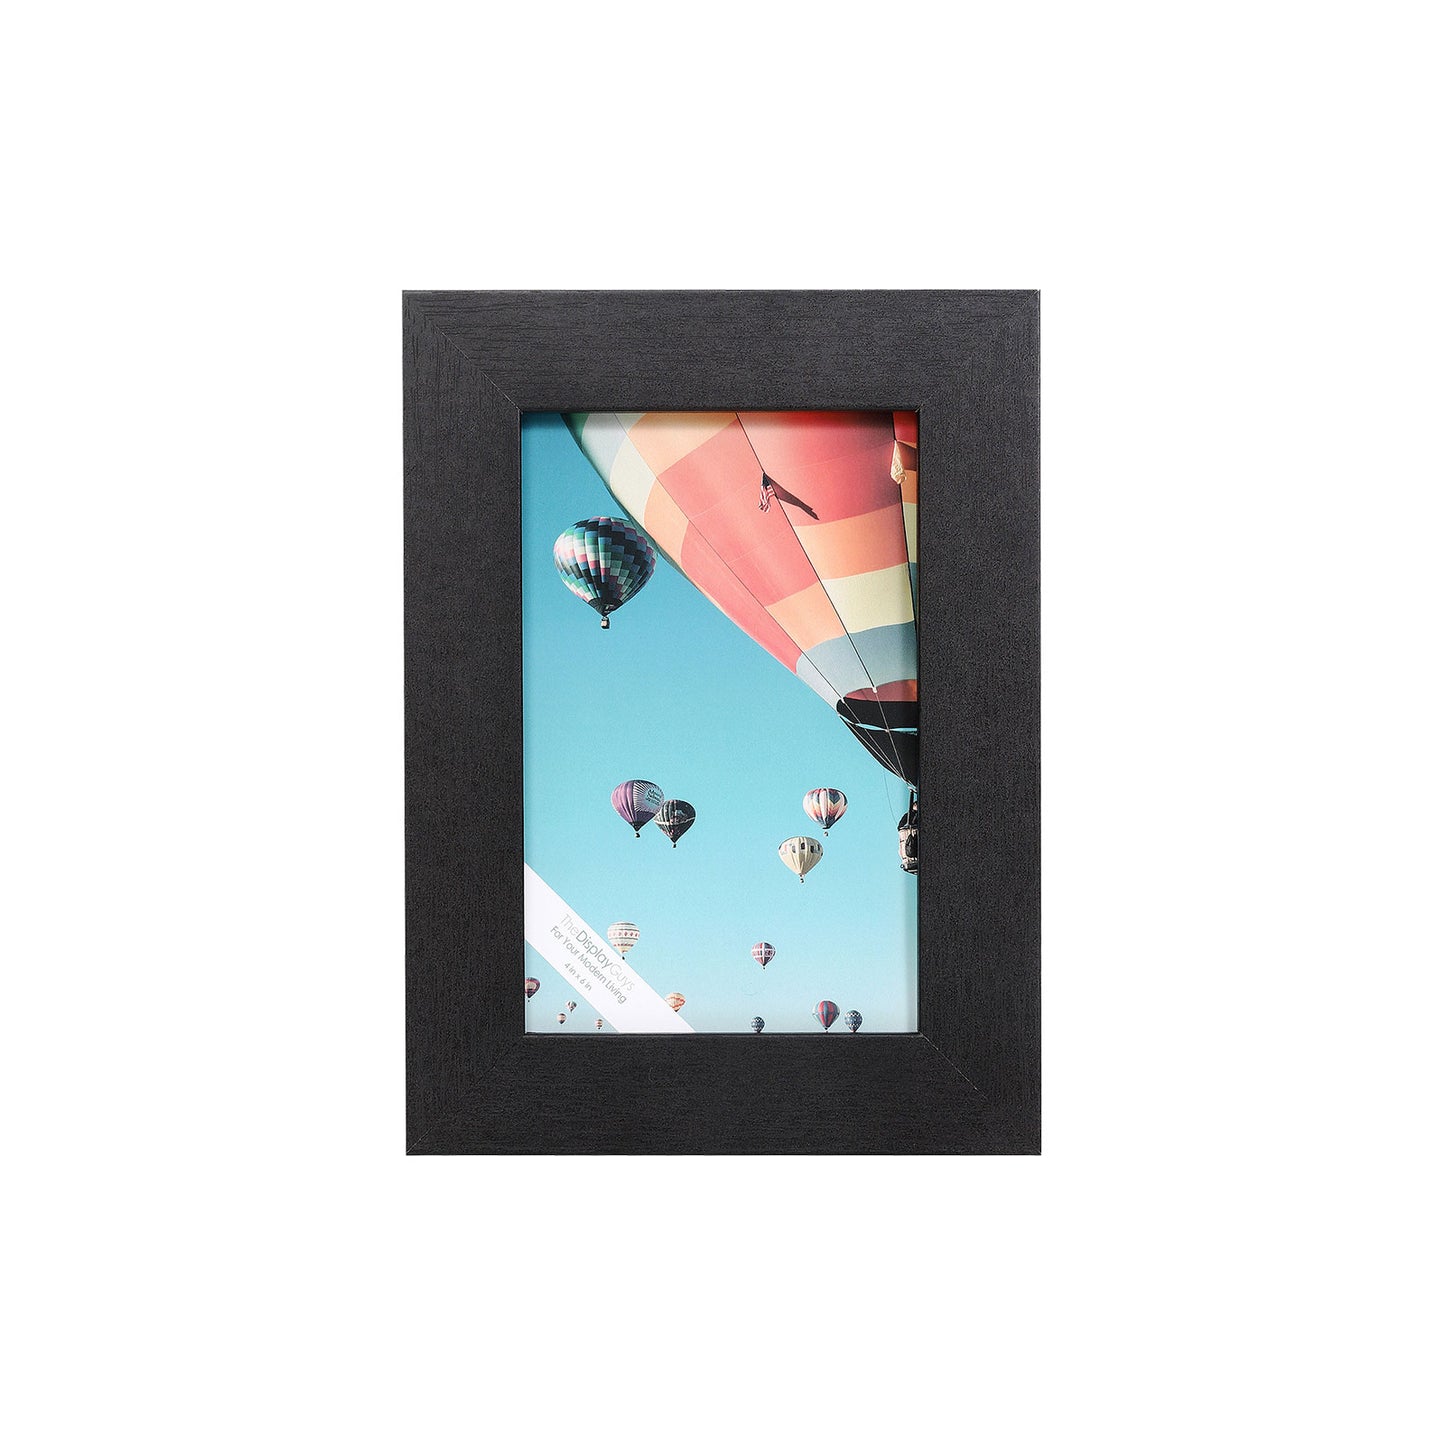 4" x 6" Matte Black MDF Wood 6 Pack Picture Frames with Tempered Glass